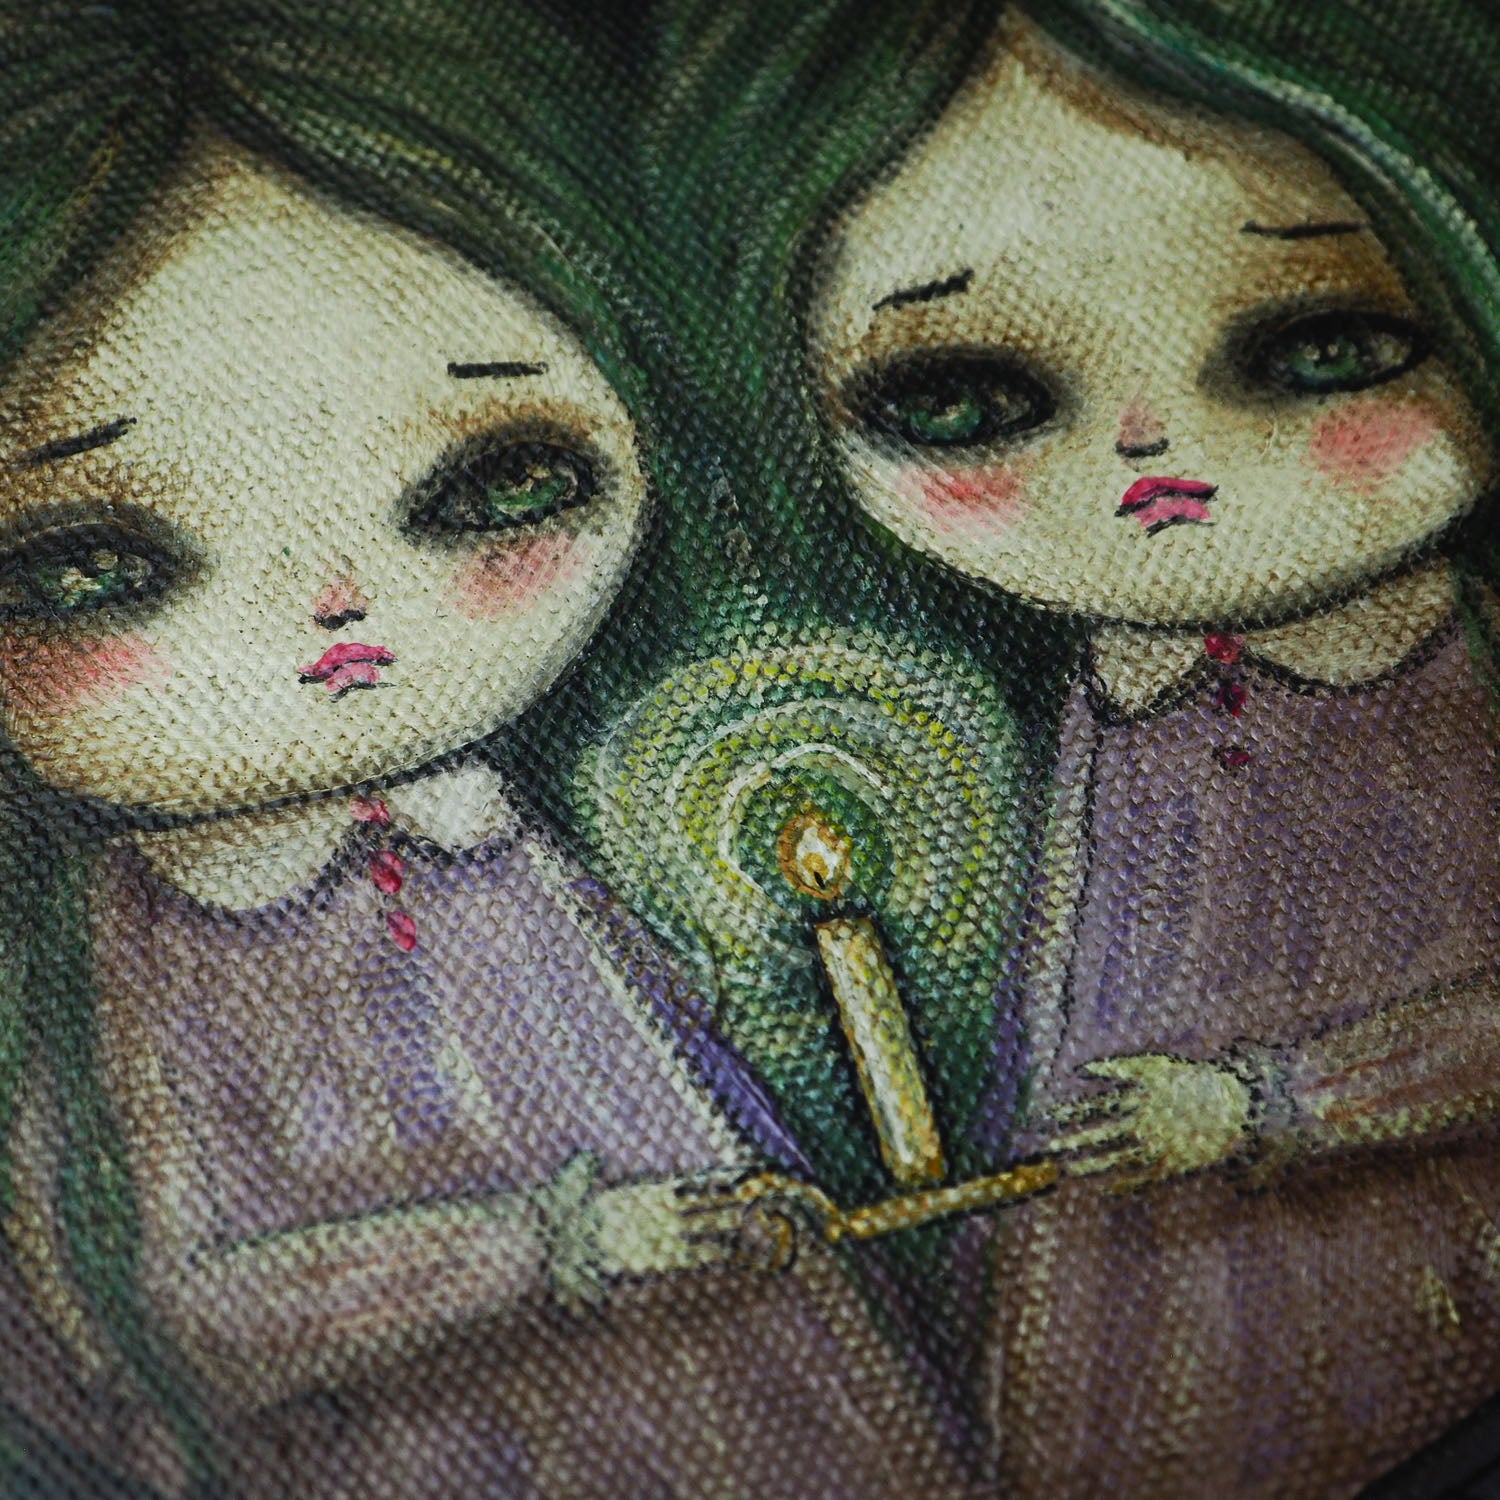 Sisters by candle light: An original mixed media painting by Danita. Mystery and horror mix in a whimsical image of two sisters exploring a haunted mansion by candlelight. Made with acrylics, oils, pencils, graphite and more over a stretched canvas.